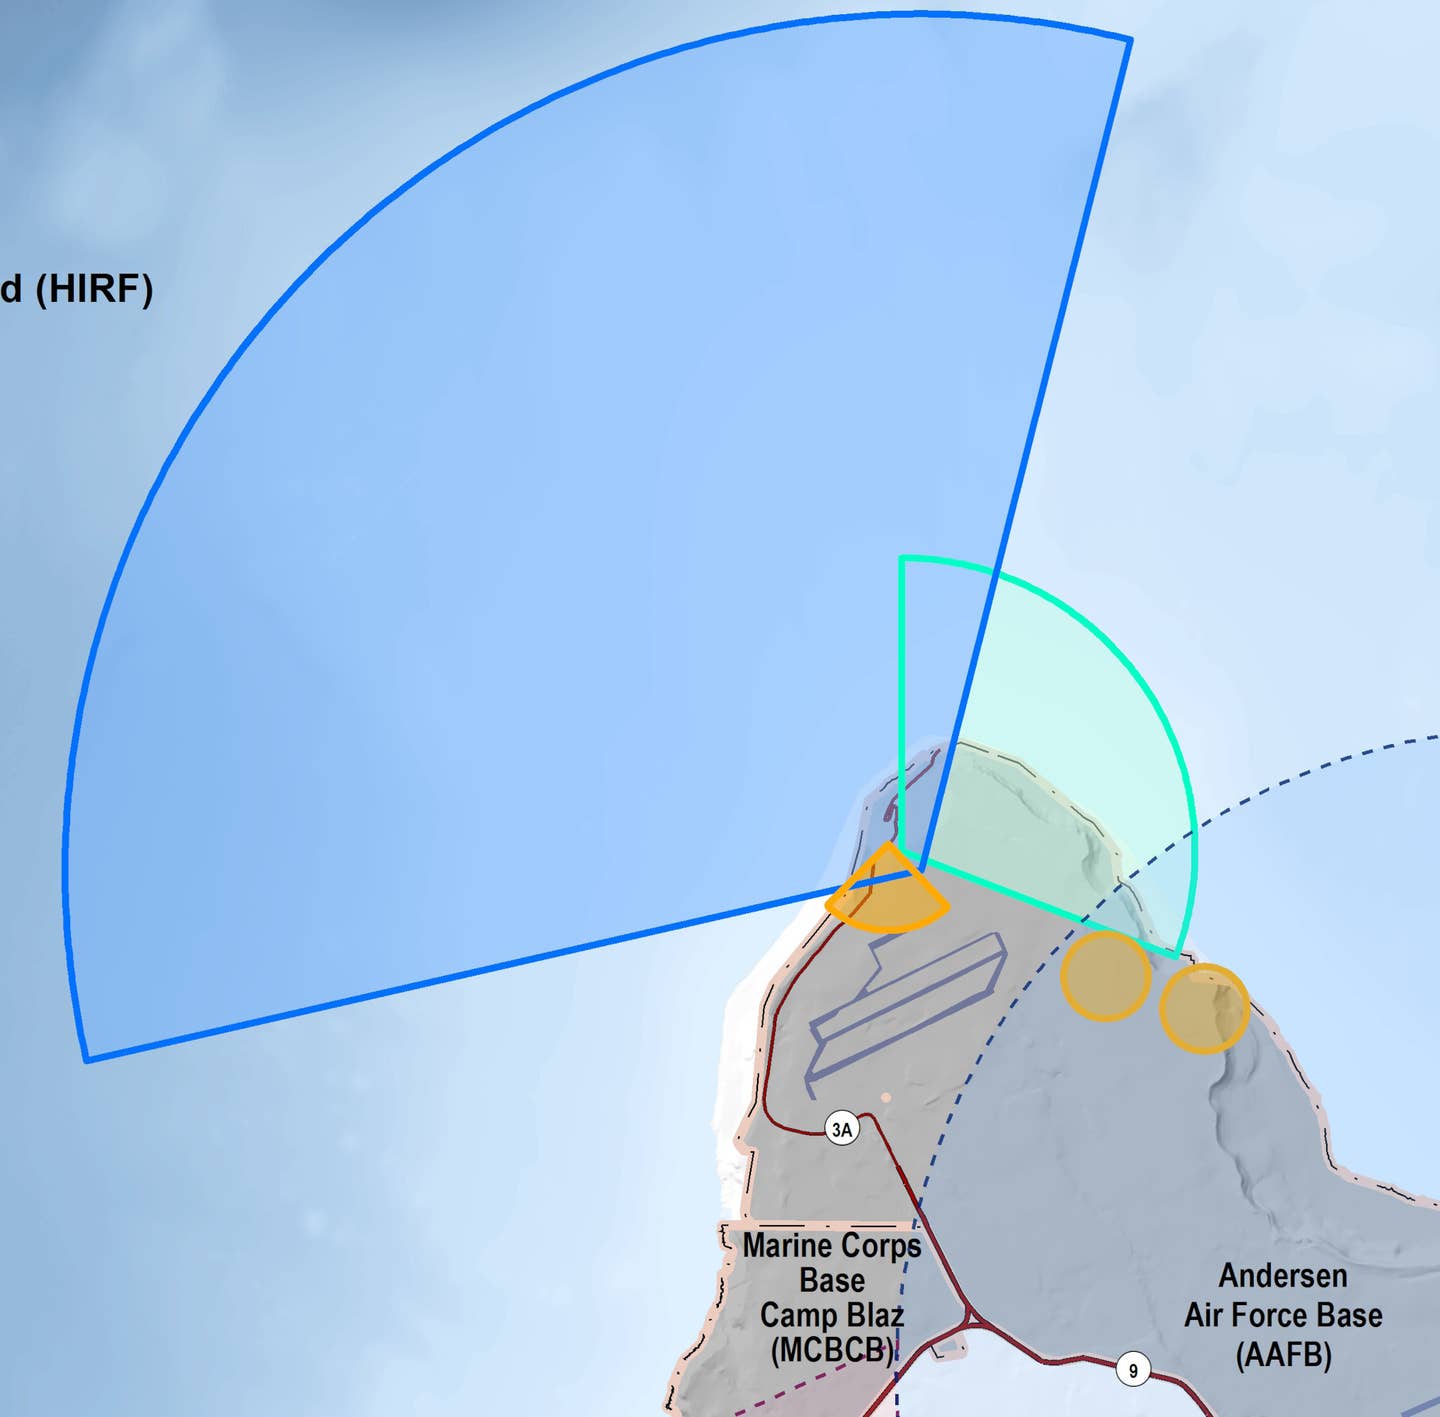 Another section of the radar/airspace map showing multiple radar arcs projecting in different directions from the vicinity of Ritidian Point, as well as other locations in the northern end of Guam. <em>MDA</em>